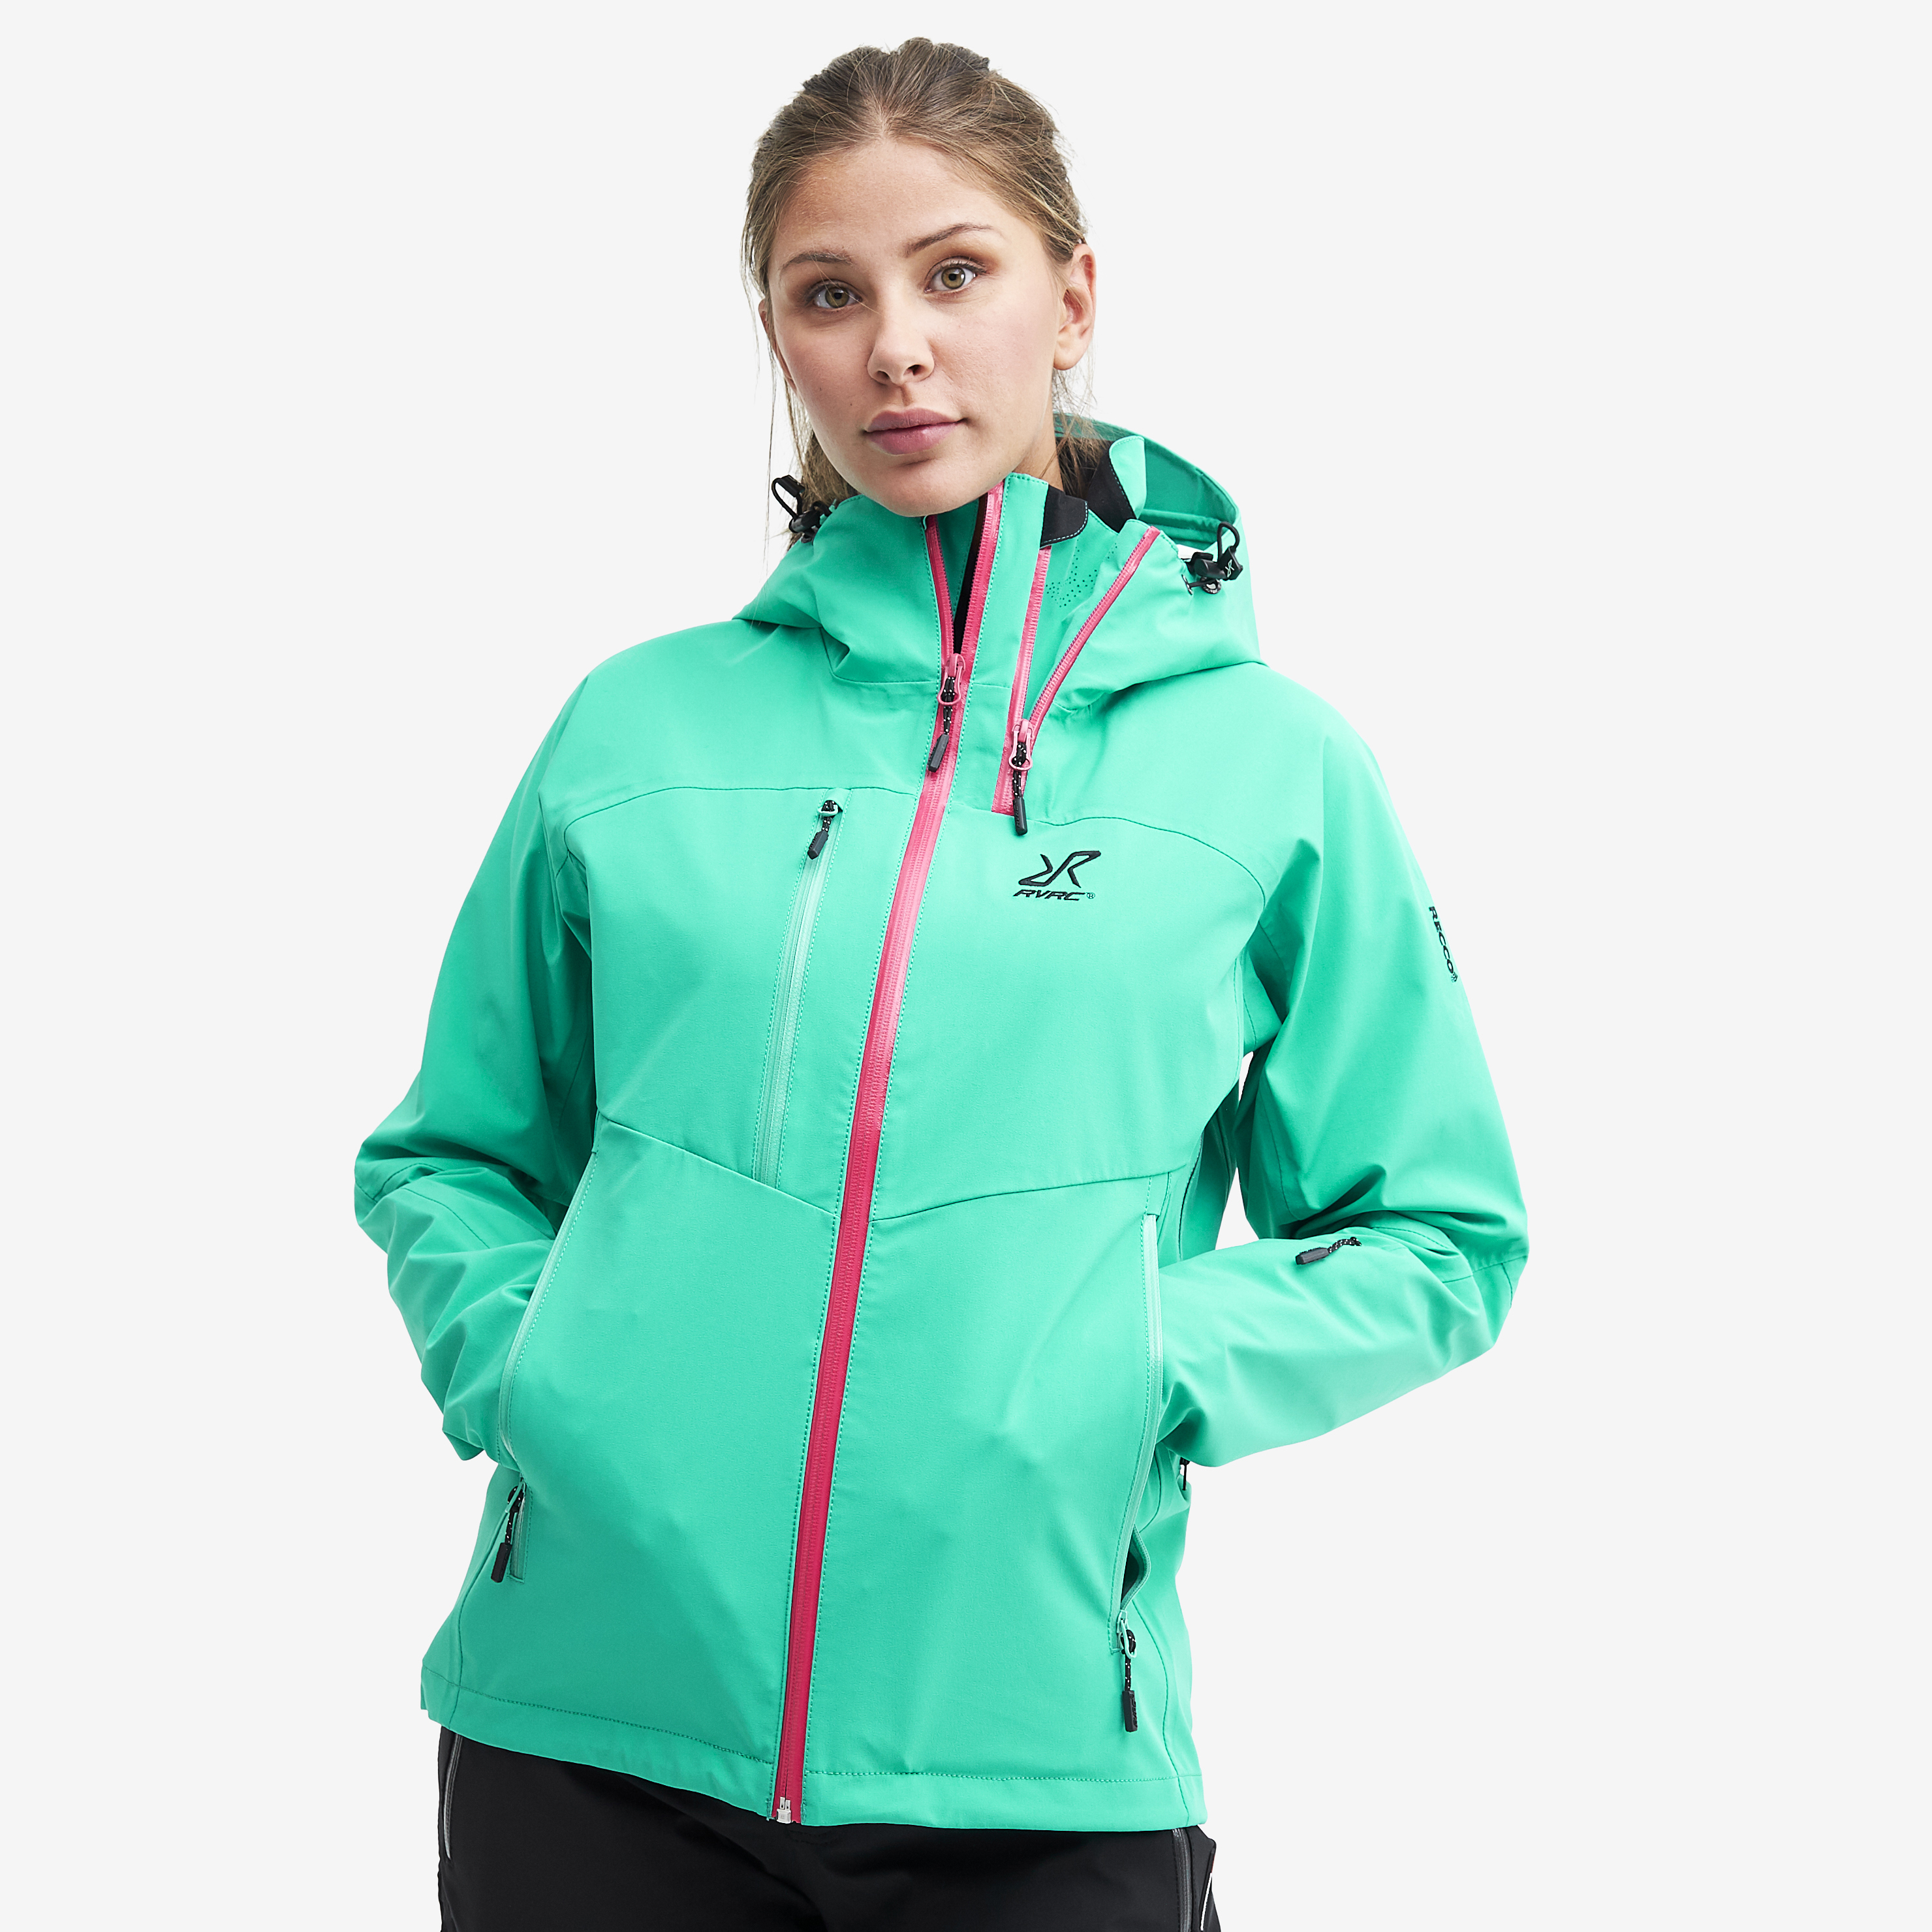 Cyclone Rescue Jacket 2.0 Spectra Green Femme